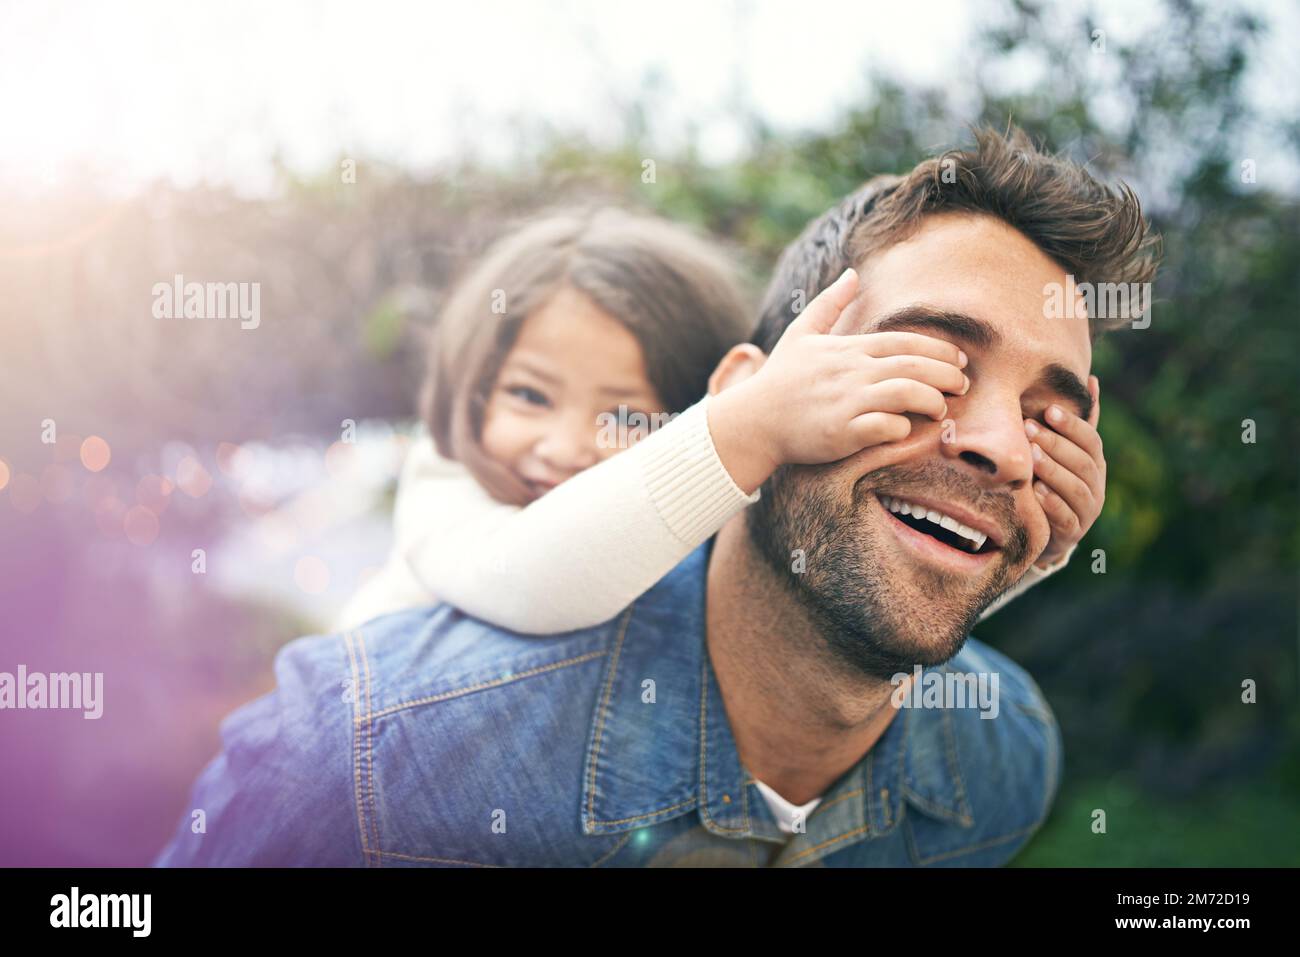 Enjoying a daddy daughter day. a little girl and her father playing together outdoors. Stock Photo